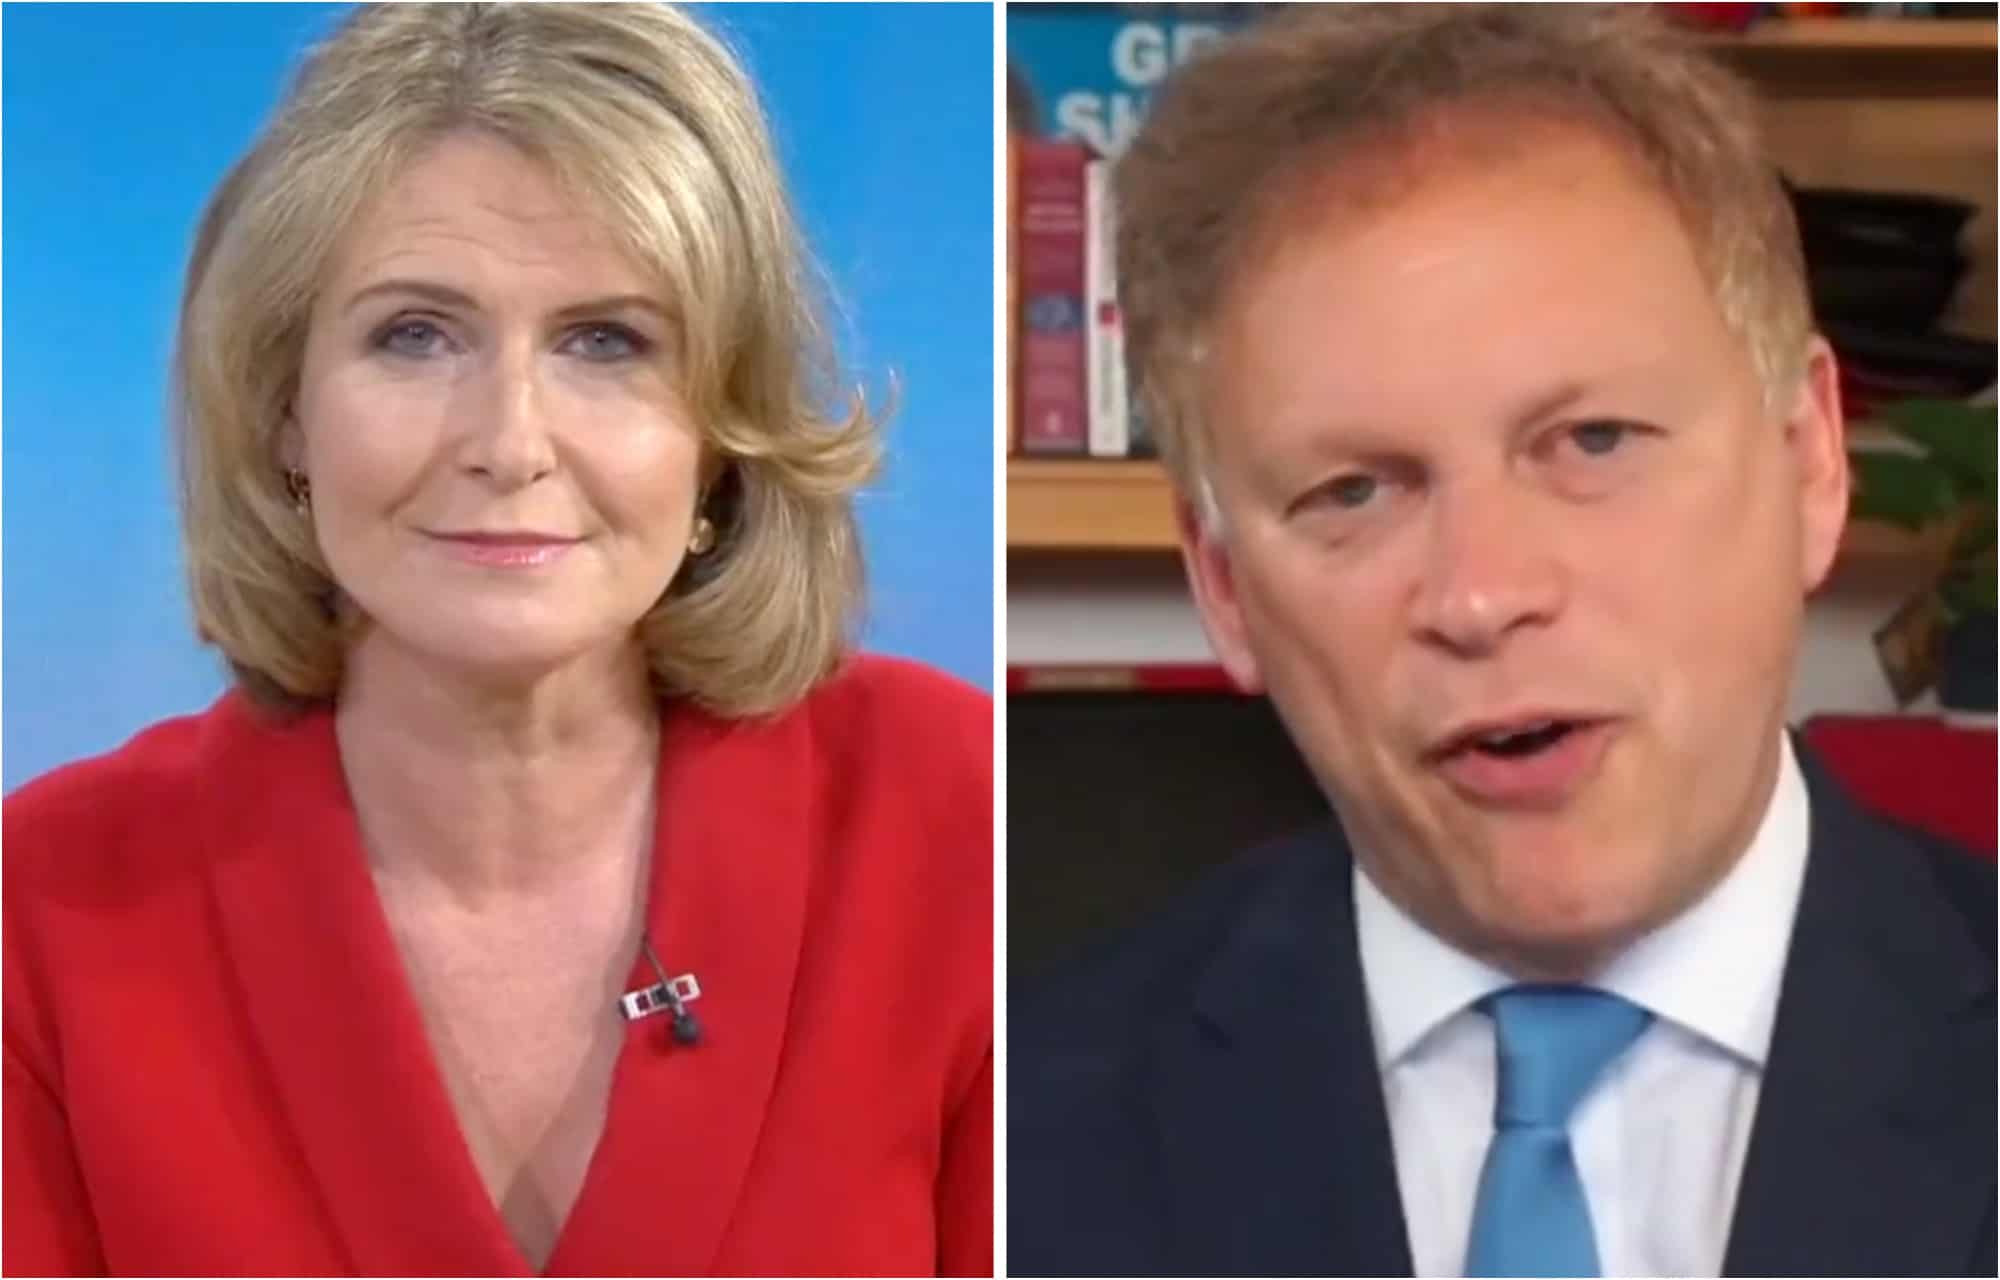 ‘Let me finish my answers’: Grant Shapps loses his cool during tense Sky News interview